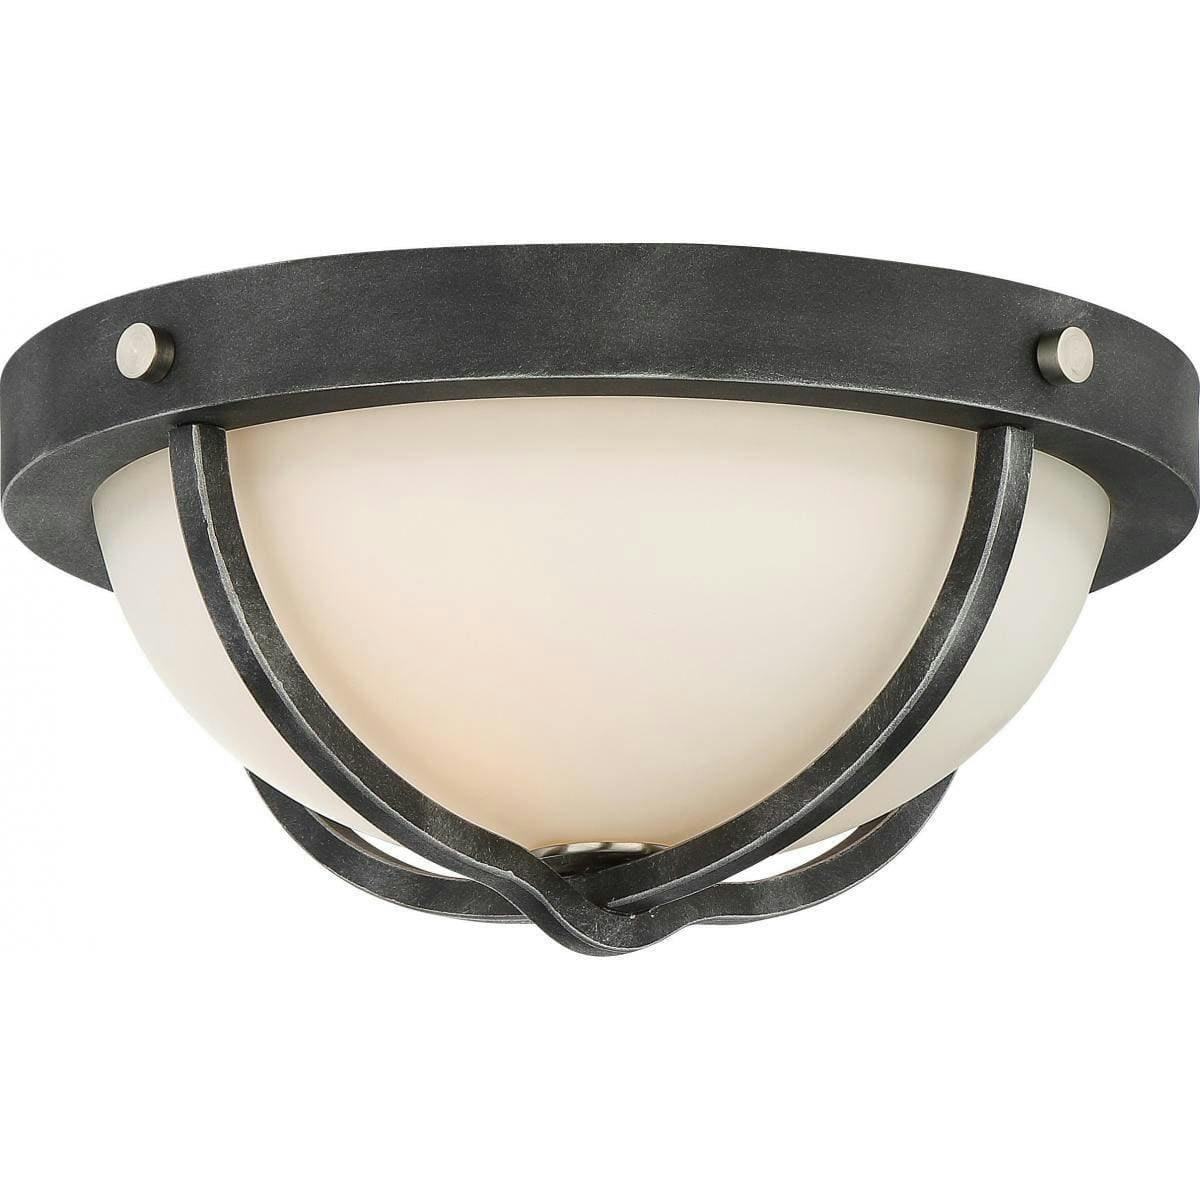 Sherwood 14.75" Brushed Nickel Flush Mount with Frosted Etched Glass